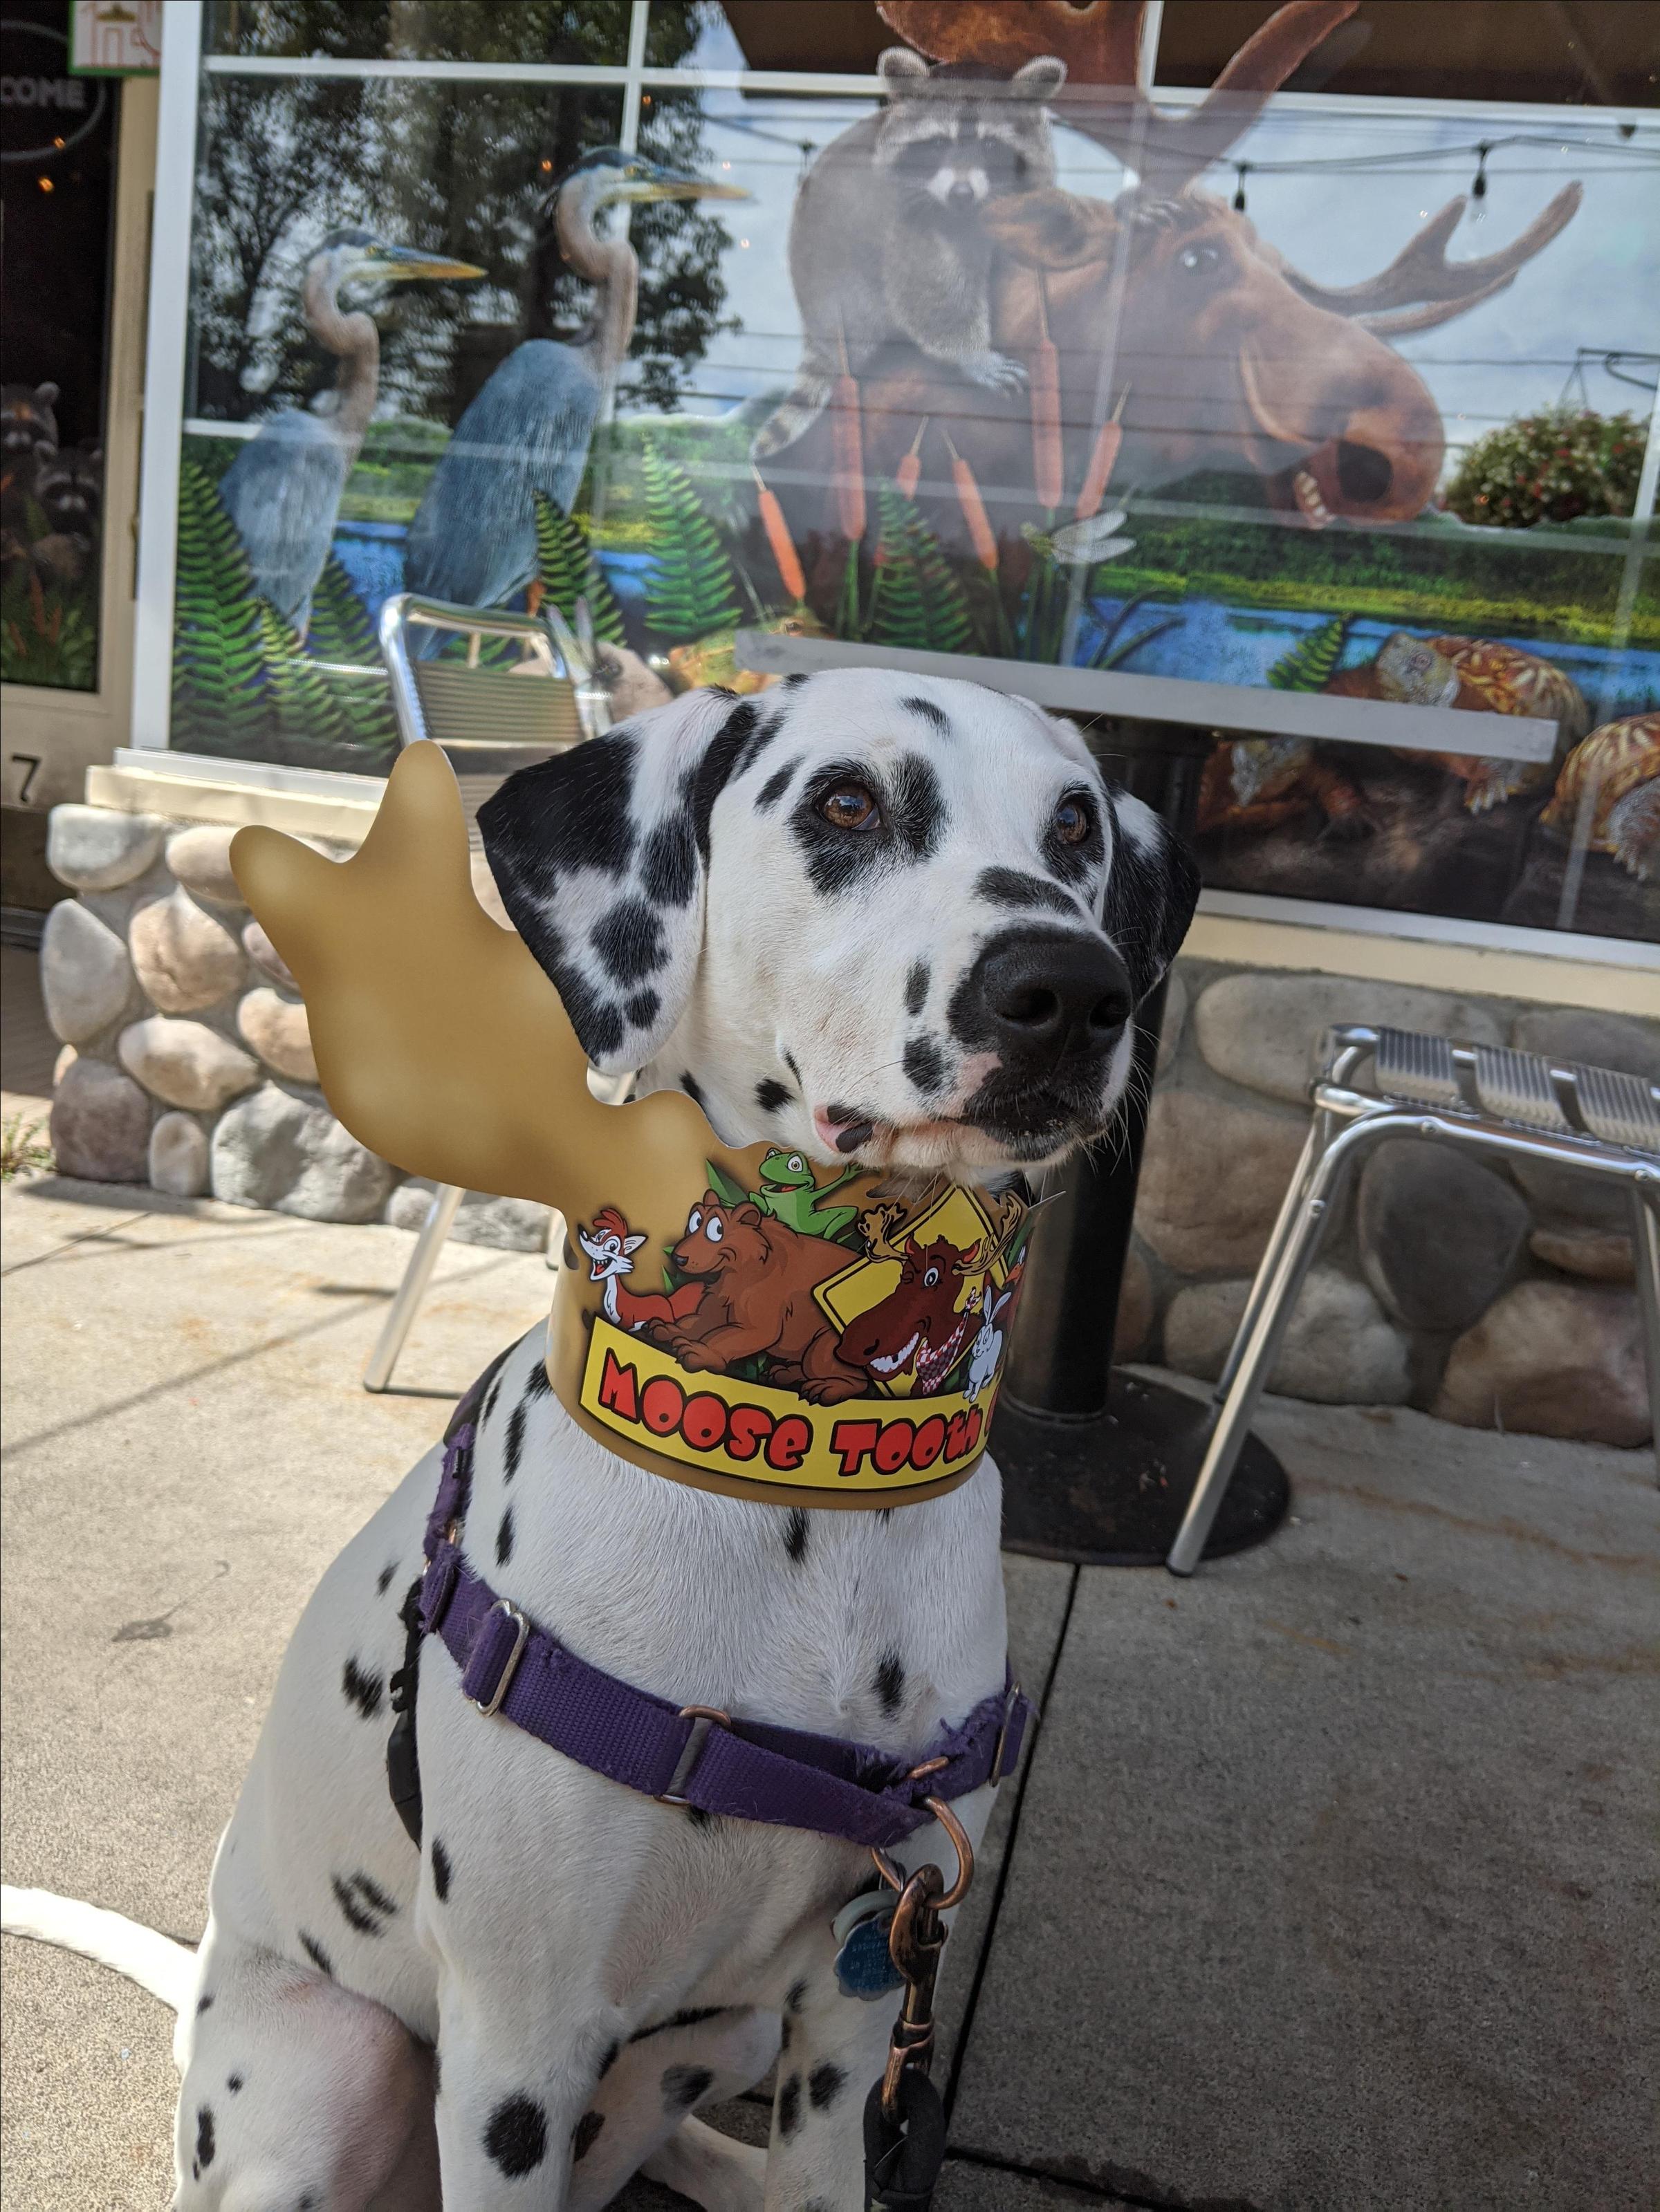 Pet Friendly Moose Tooth Grill